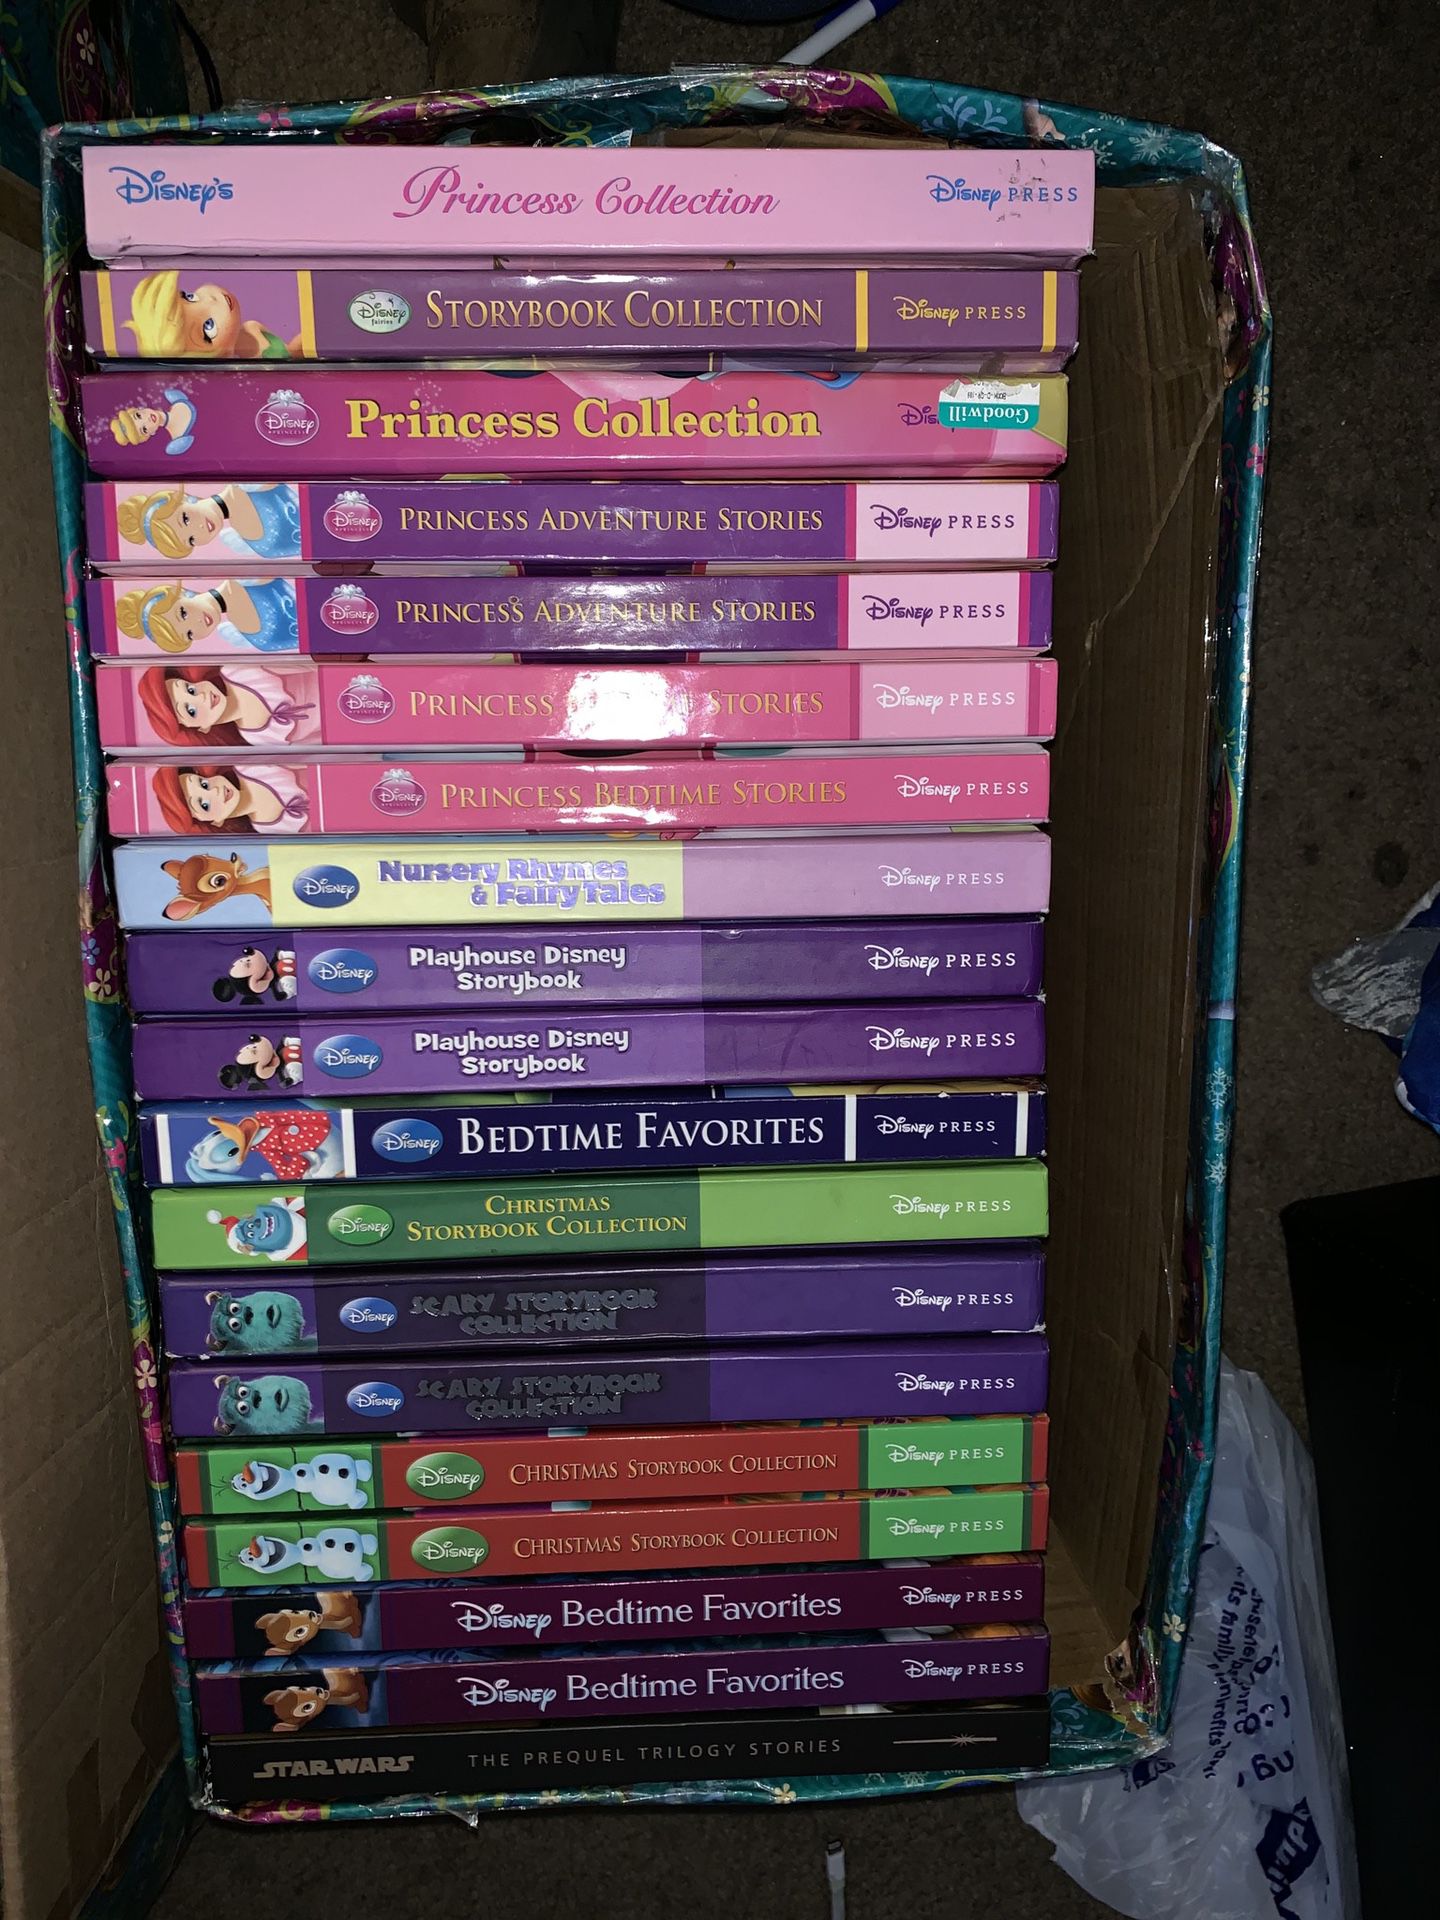 Disney's　Sale　in　books　CA　storybook　collection　Antelope,　for　OfferUp